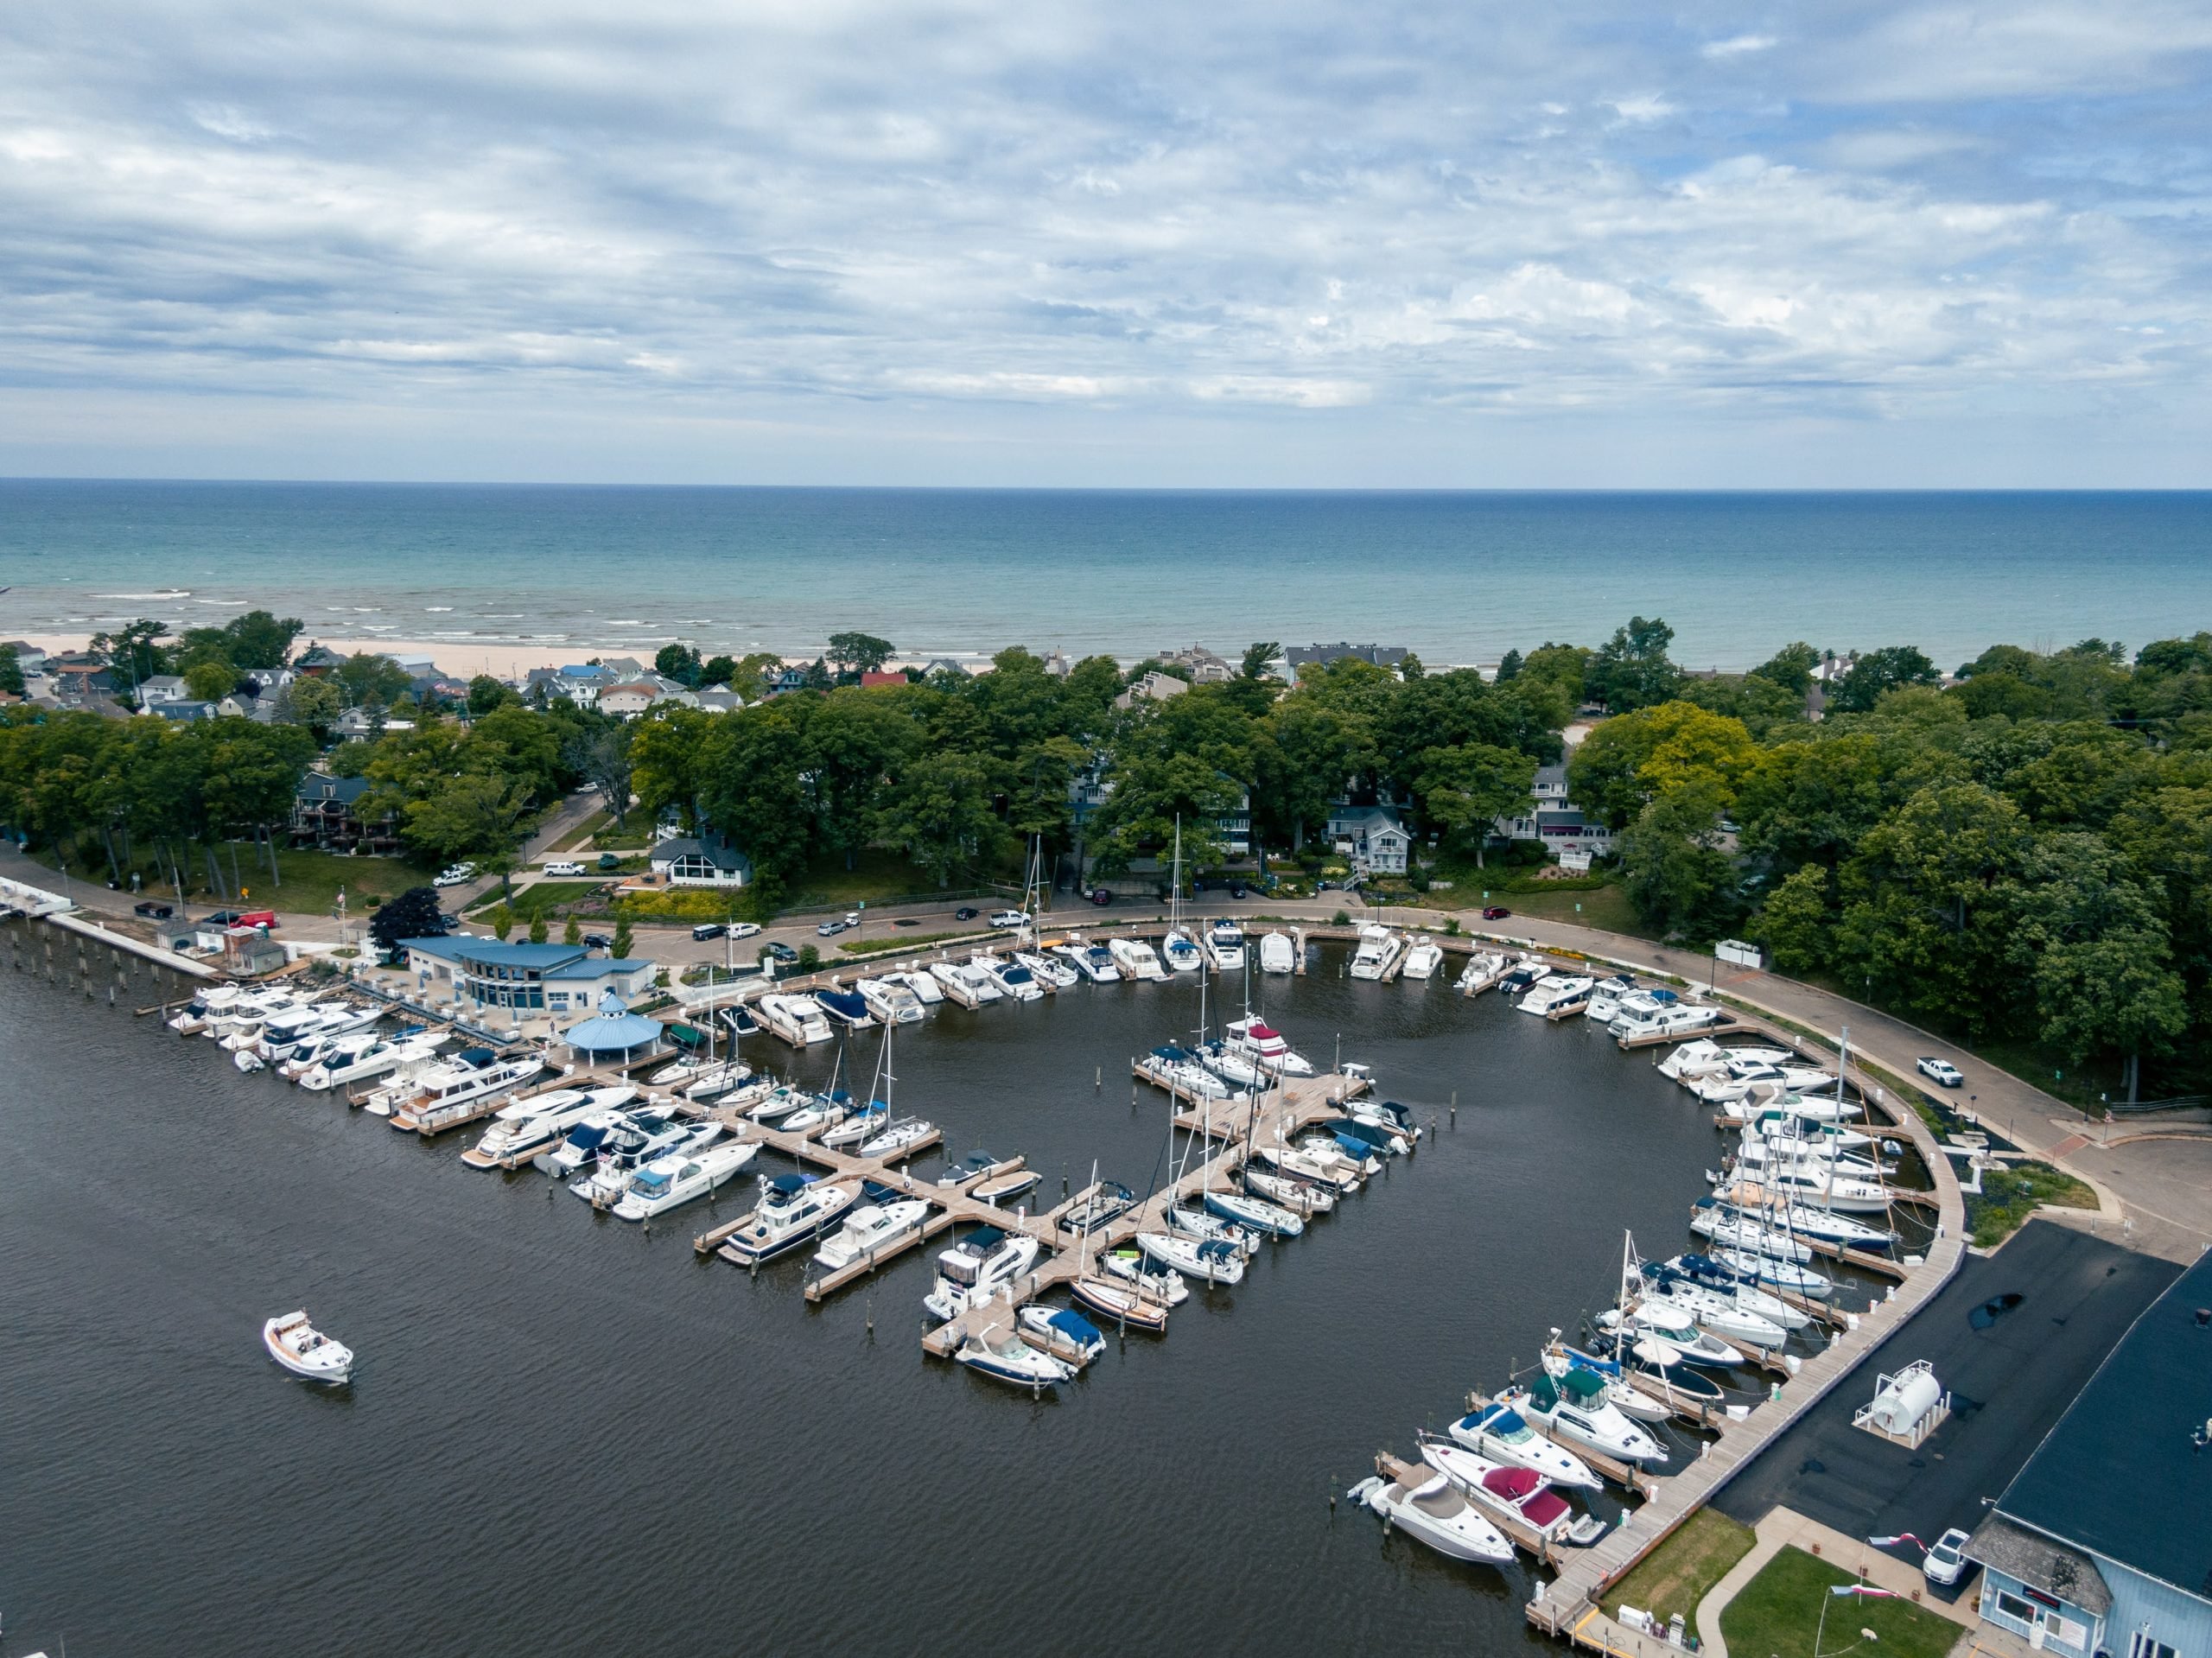 Arial view of most of the boats docked on the Black River at South Haven Municipal Marina in South Haven Michigan featuring Kebony modified clear wood decking